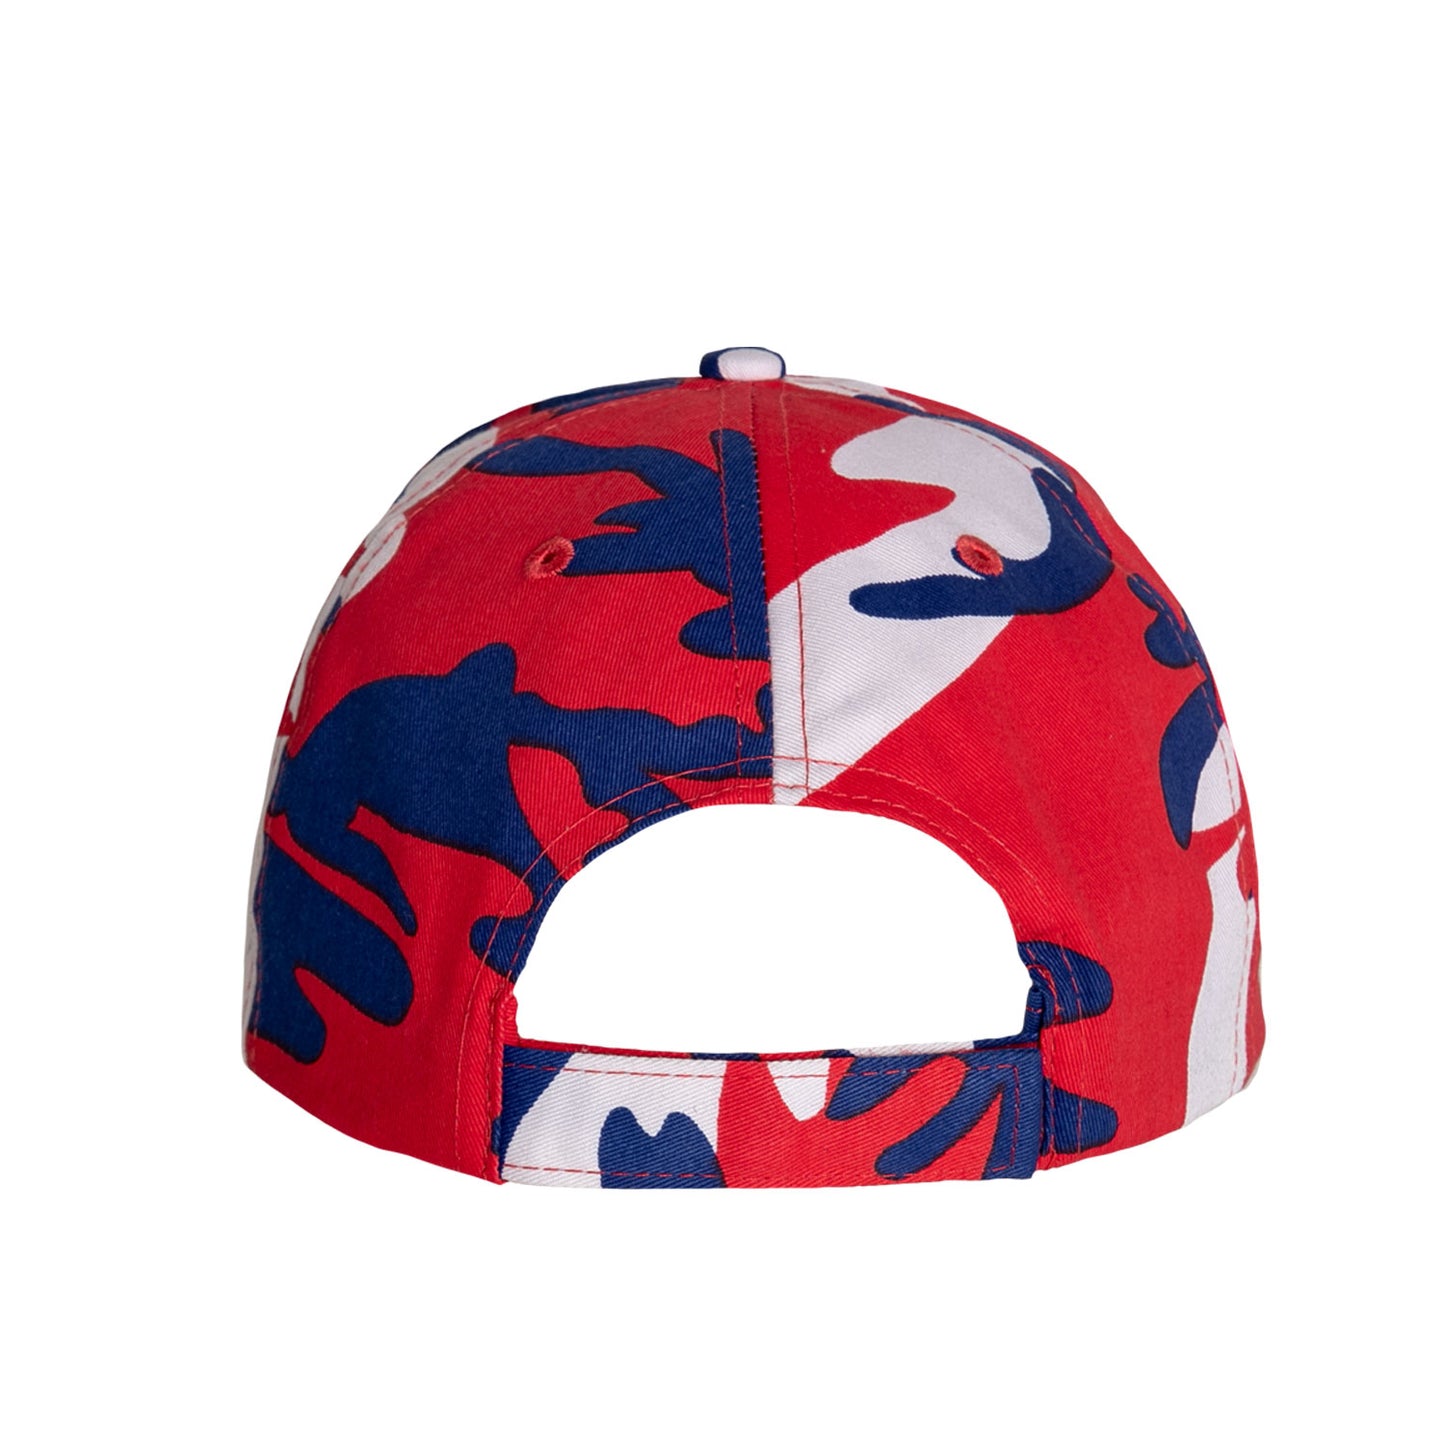 Red White Blue Camo Adjustable Baseball Hat - Rothco Color Camo Mid-Low Pro Cap